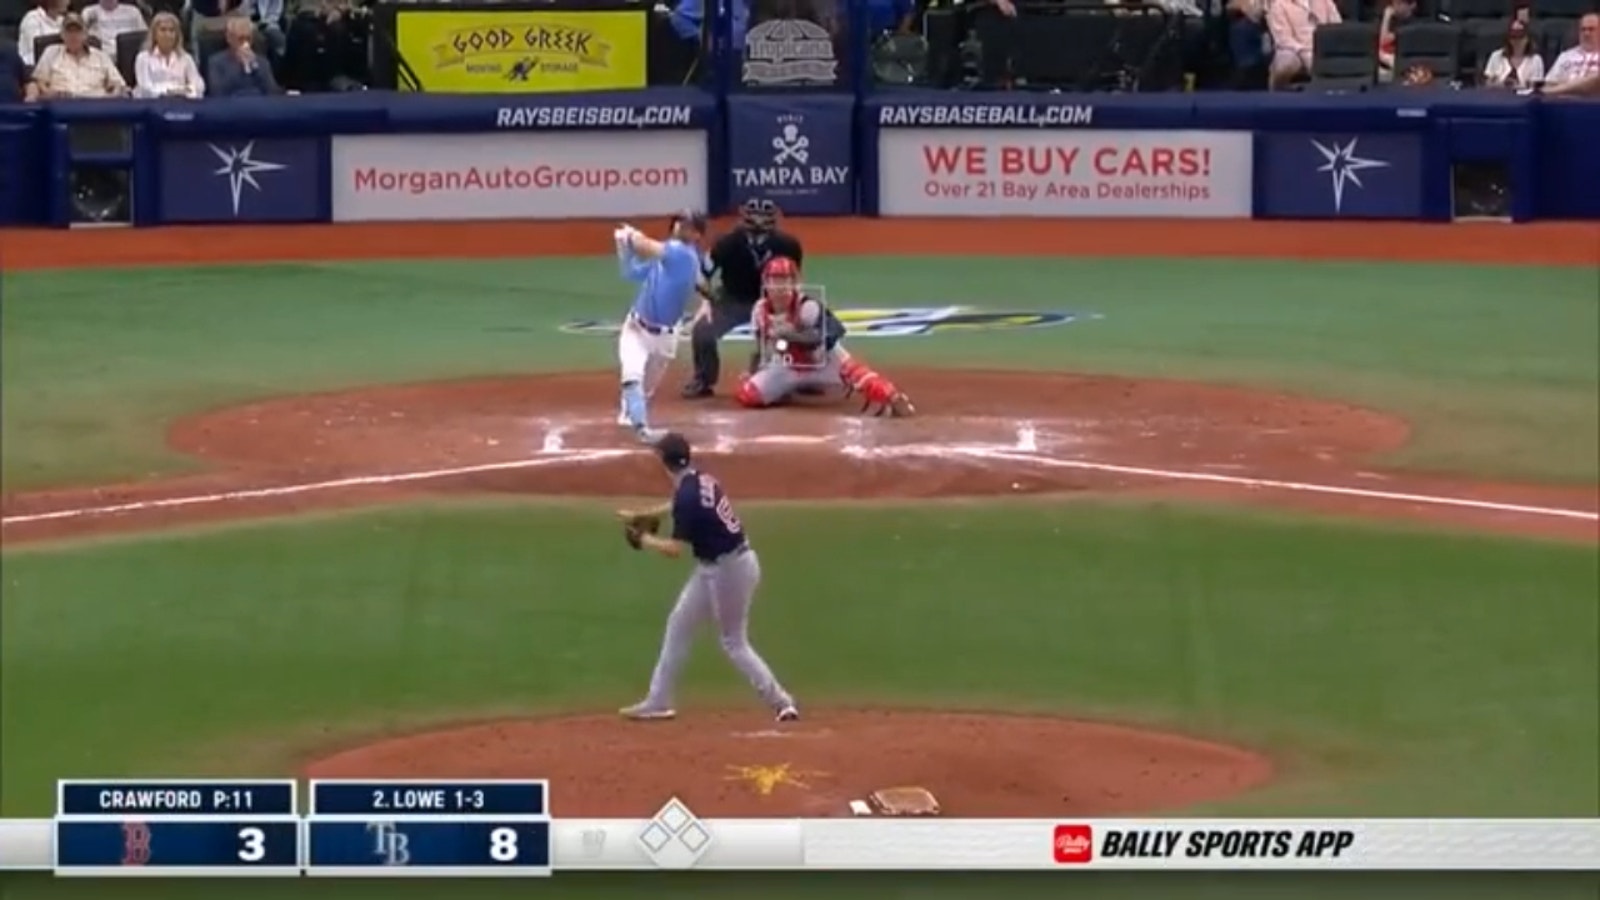 Brandon Lowe cranks a solo homer to extend the Rays' lead vs. the Red Sox